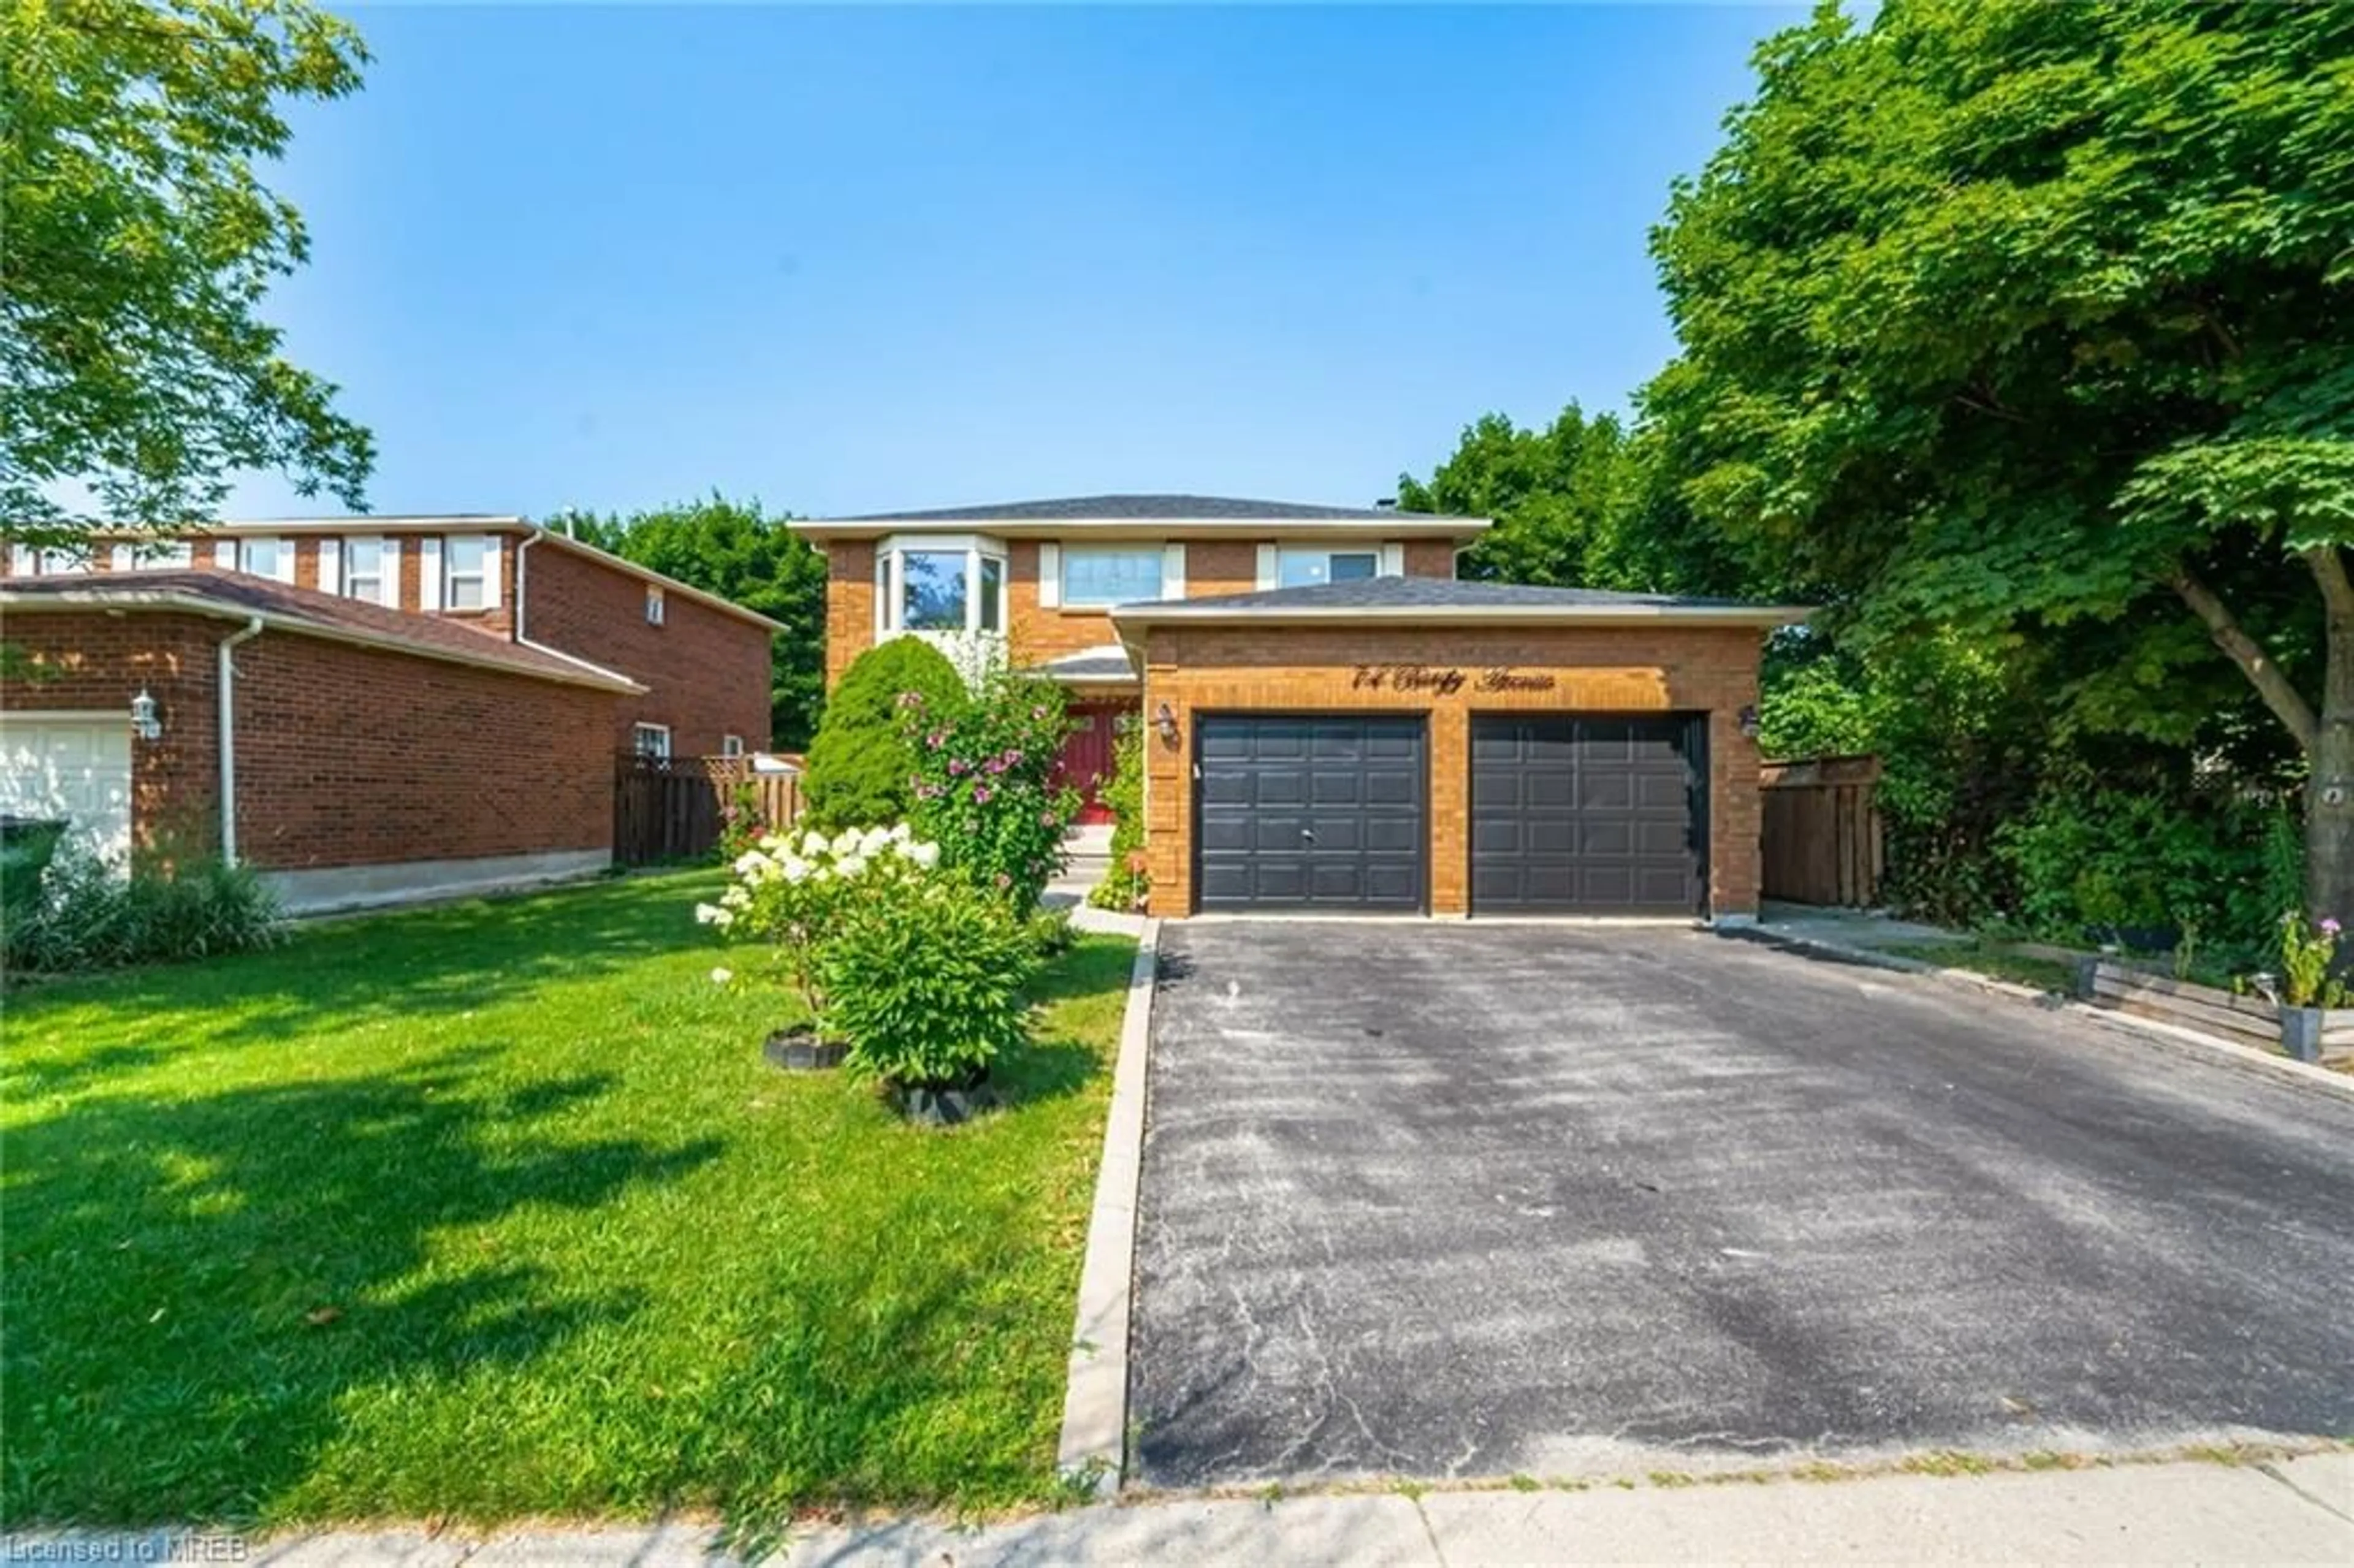 Home with brick exterior material for 74 Burgby Ave, Peel Ontario L6X 3A4